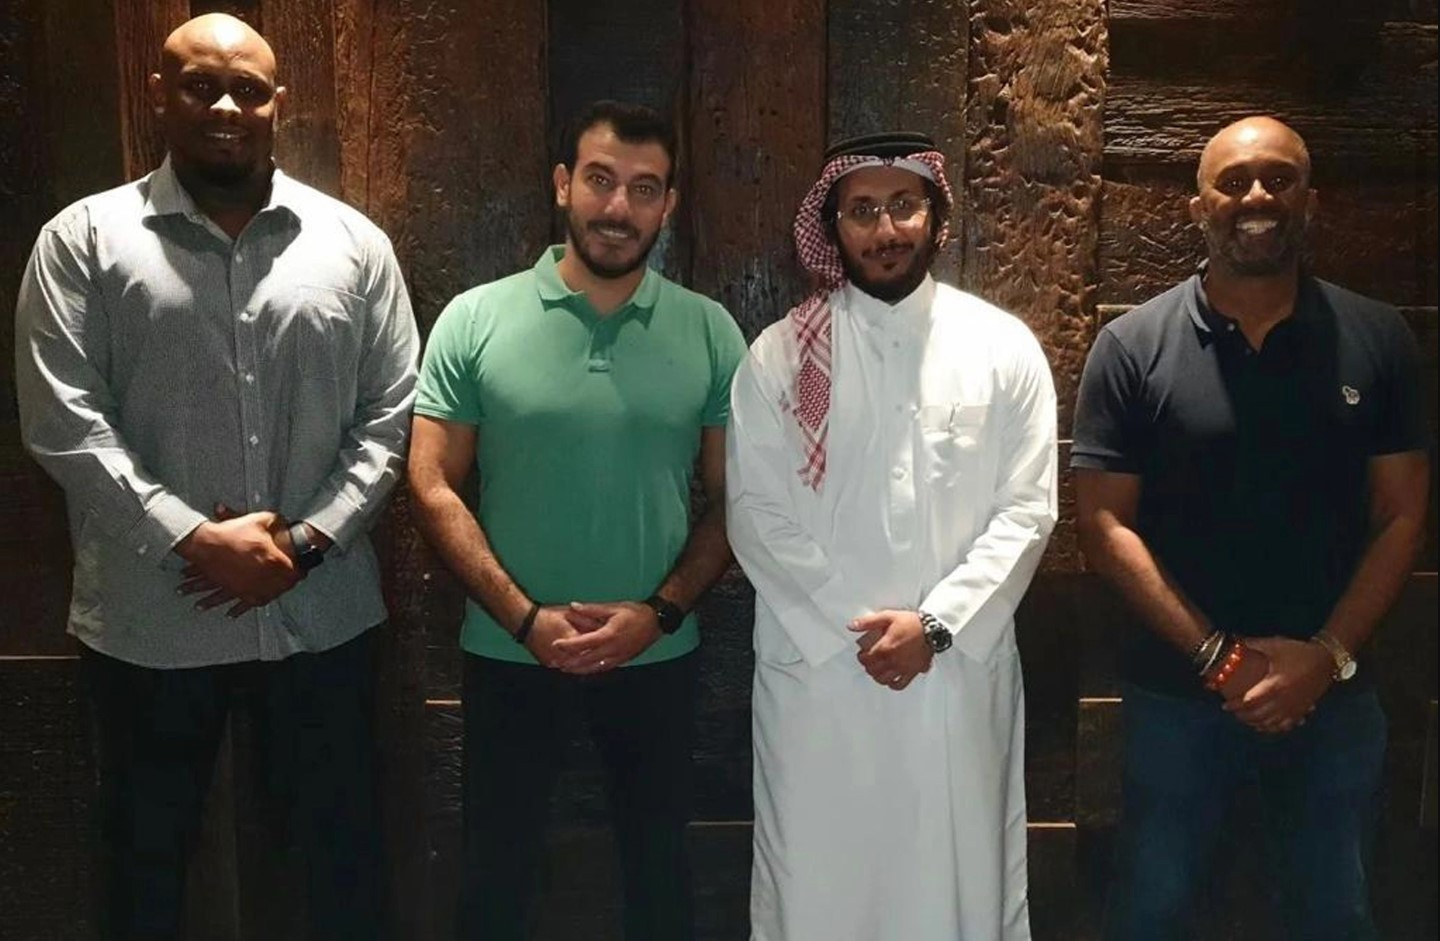 An IMMAF delegation visited Qatar to discuss developing MMA in the country ©IMMAF